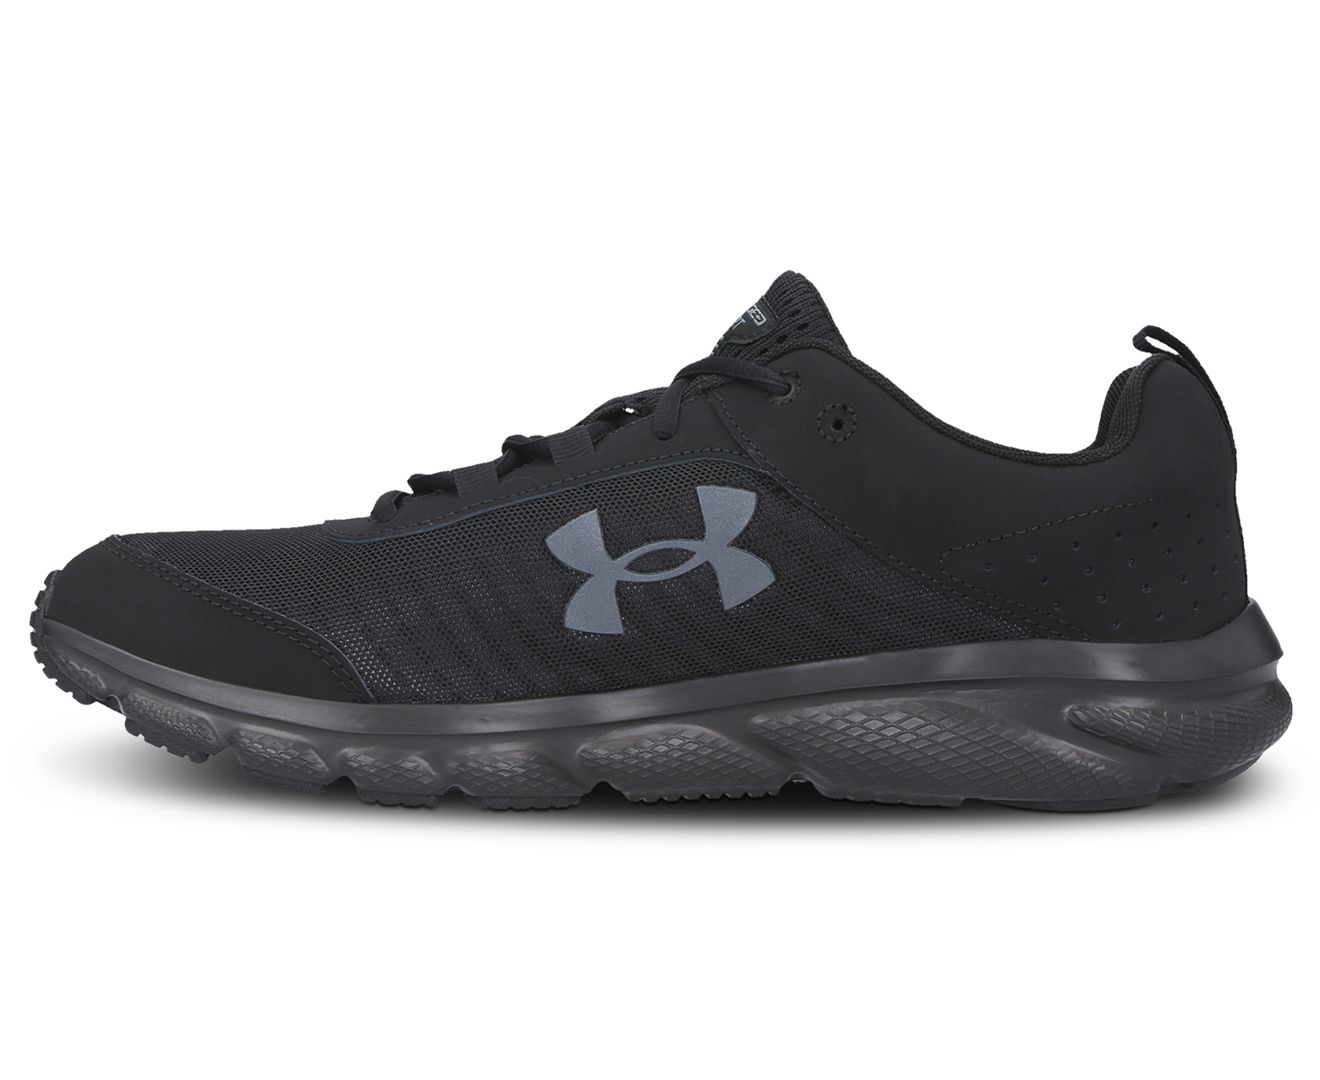 Under Armour Men's Charged Assert 8 Training Shoes - Black | Catch.co.nz